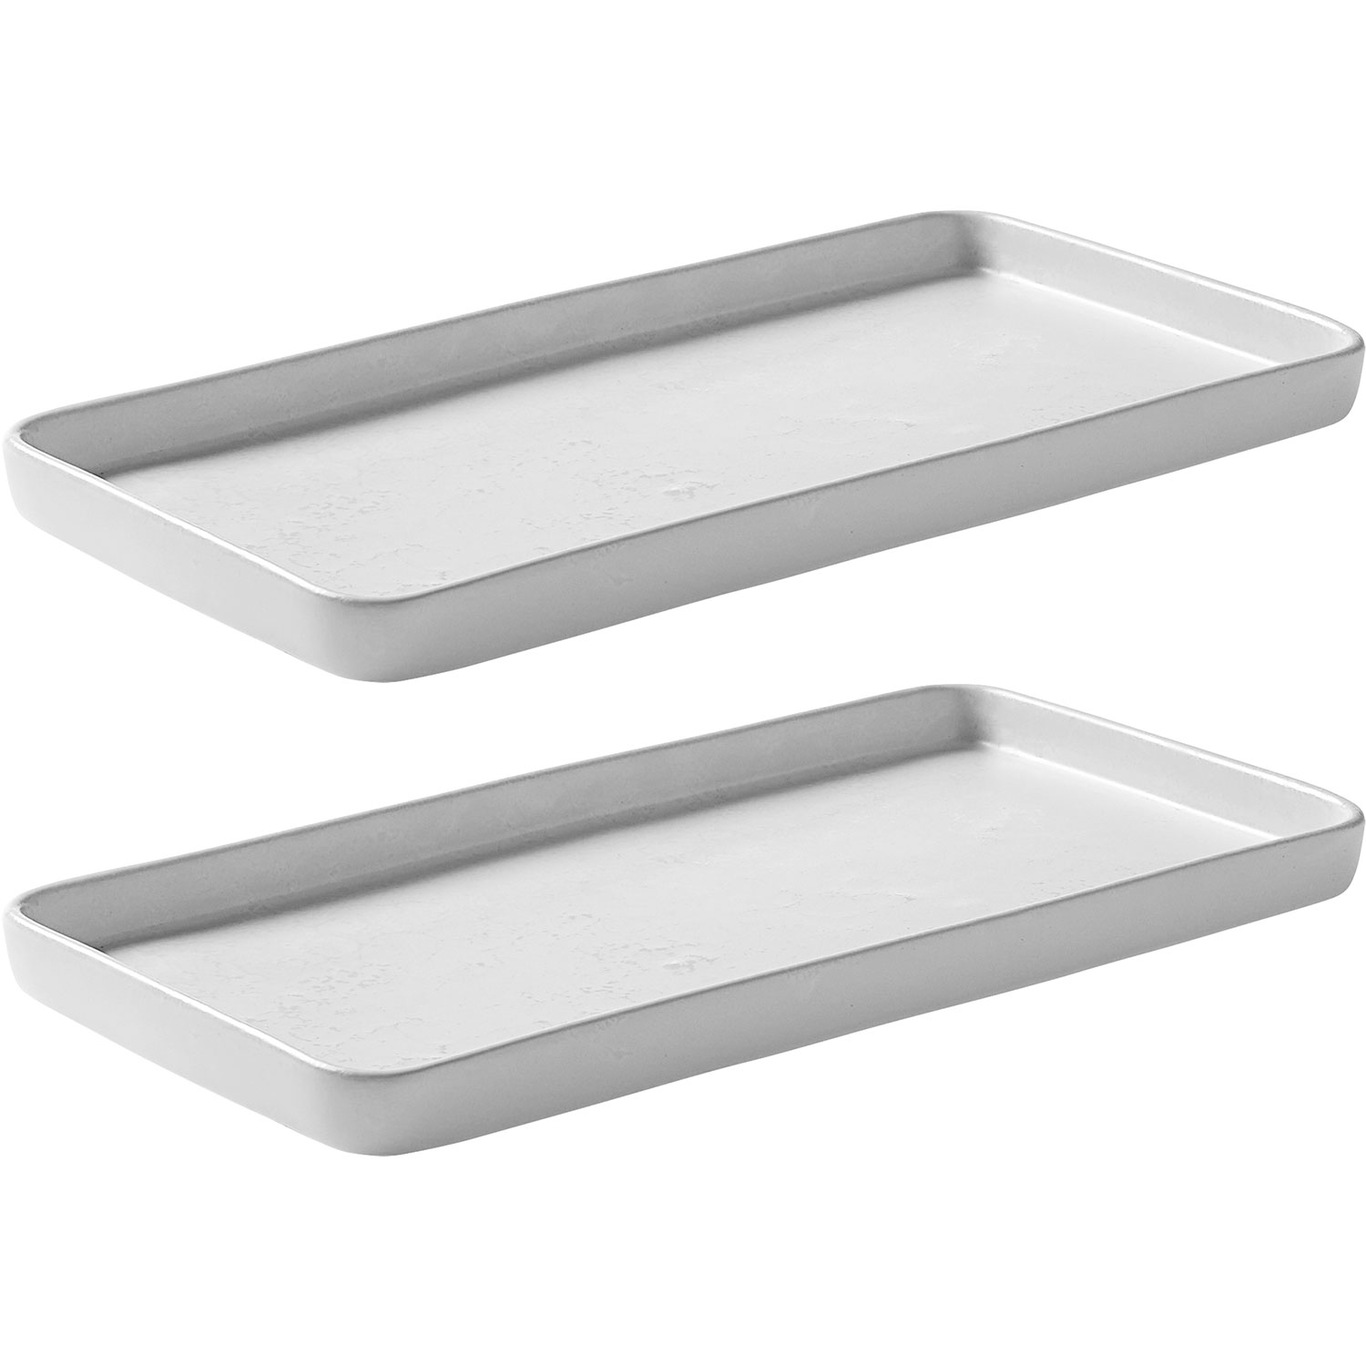 Raw Dishes Arctic White, 2-pack